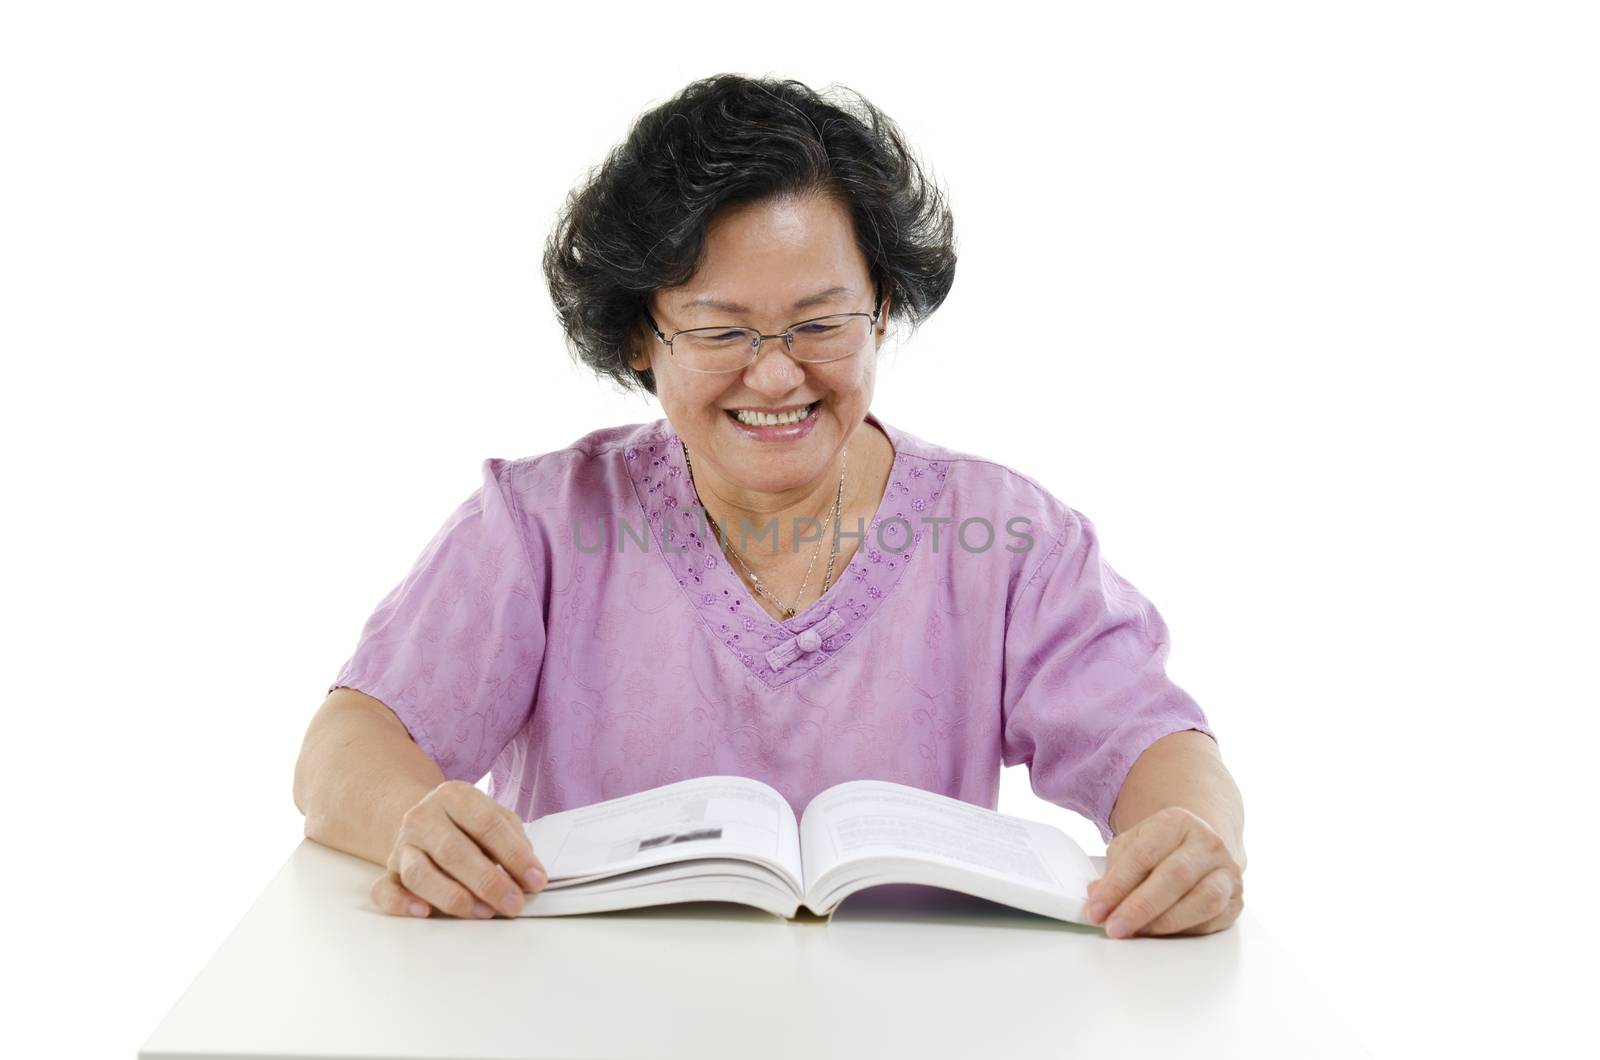 Portrait of wise Asian senior adult woman reading book, isolated on white background.